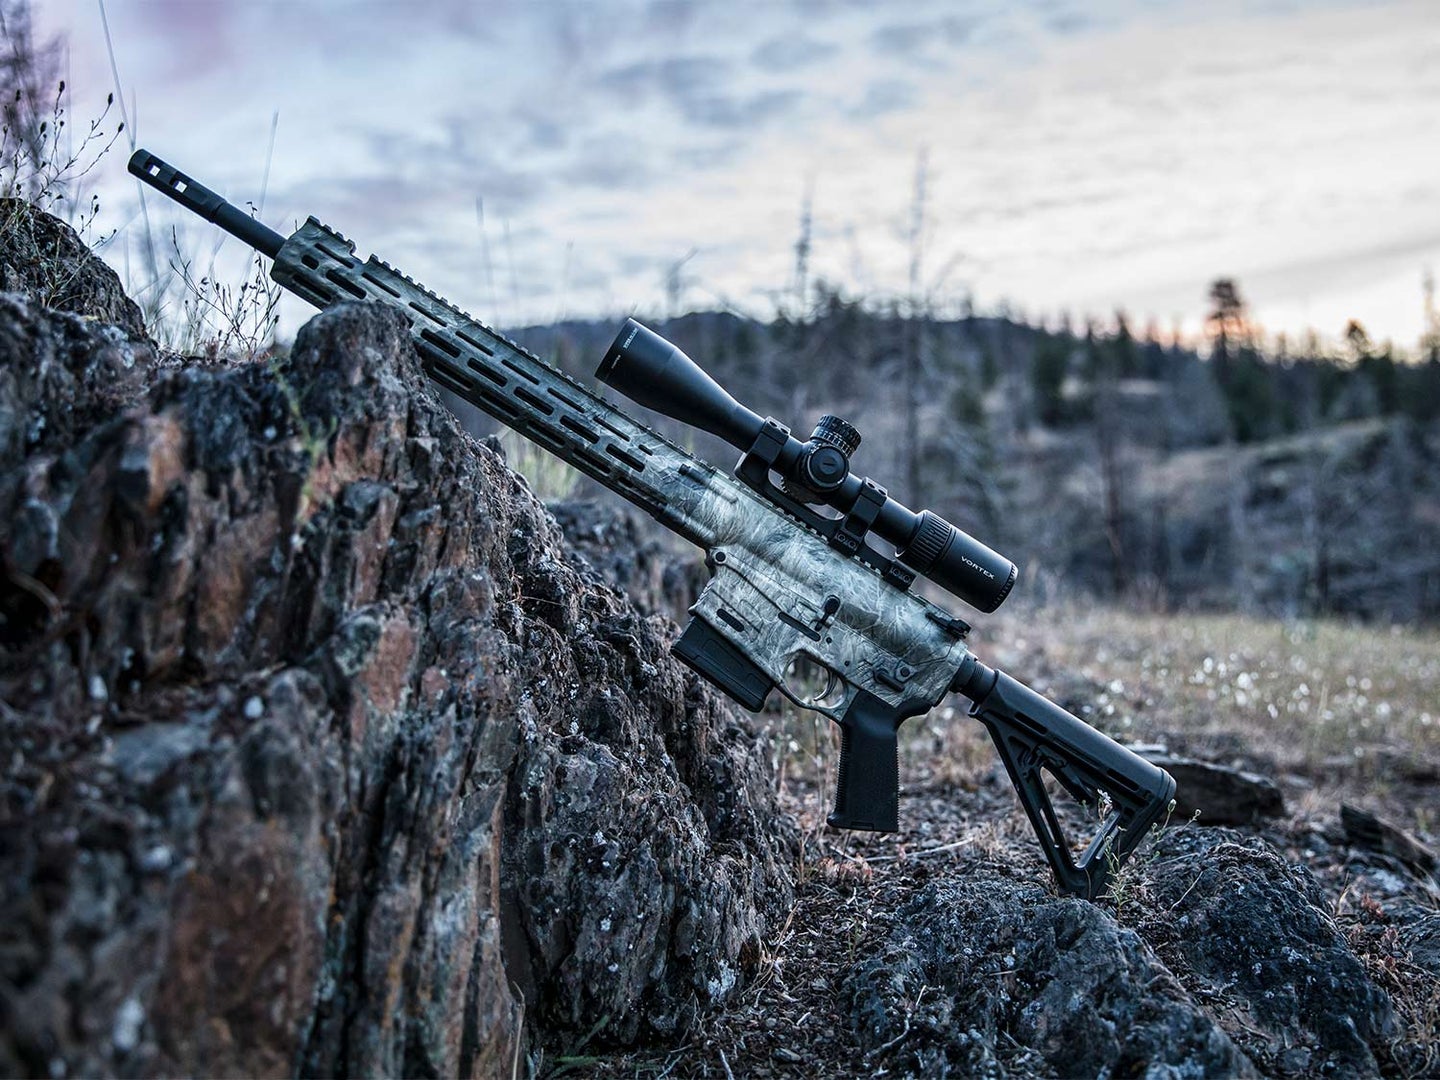 The Savage Arms MSR 10 Hunter Overwatch rifle leaning against a small rock formation in the wilderness.